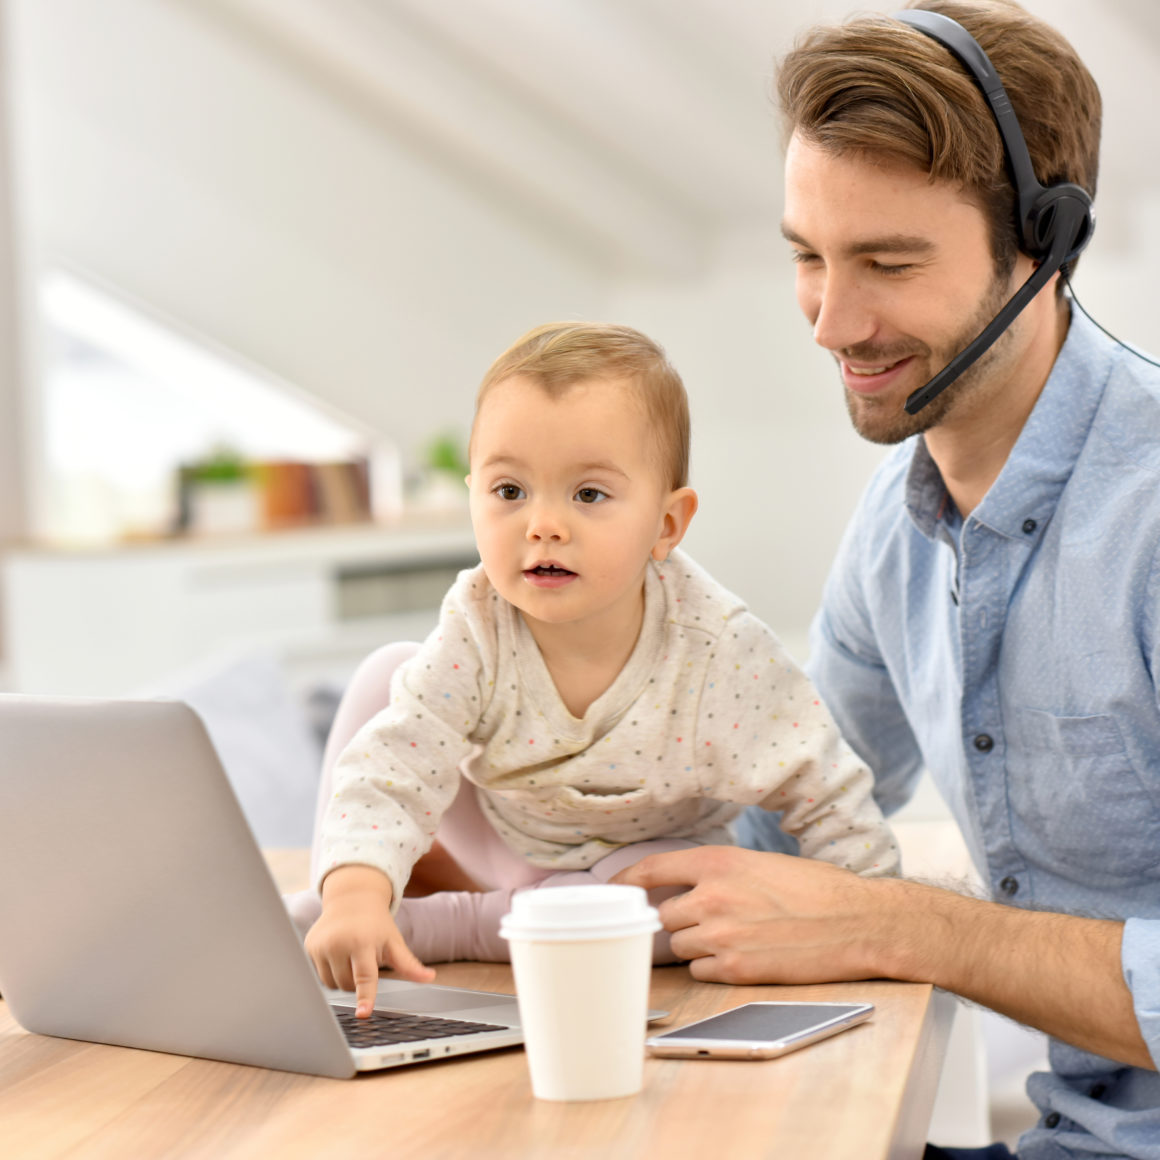 Increased flexibility for Parental Leave Pay for self-employed